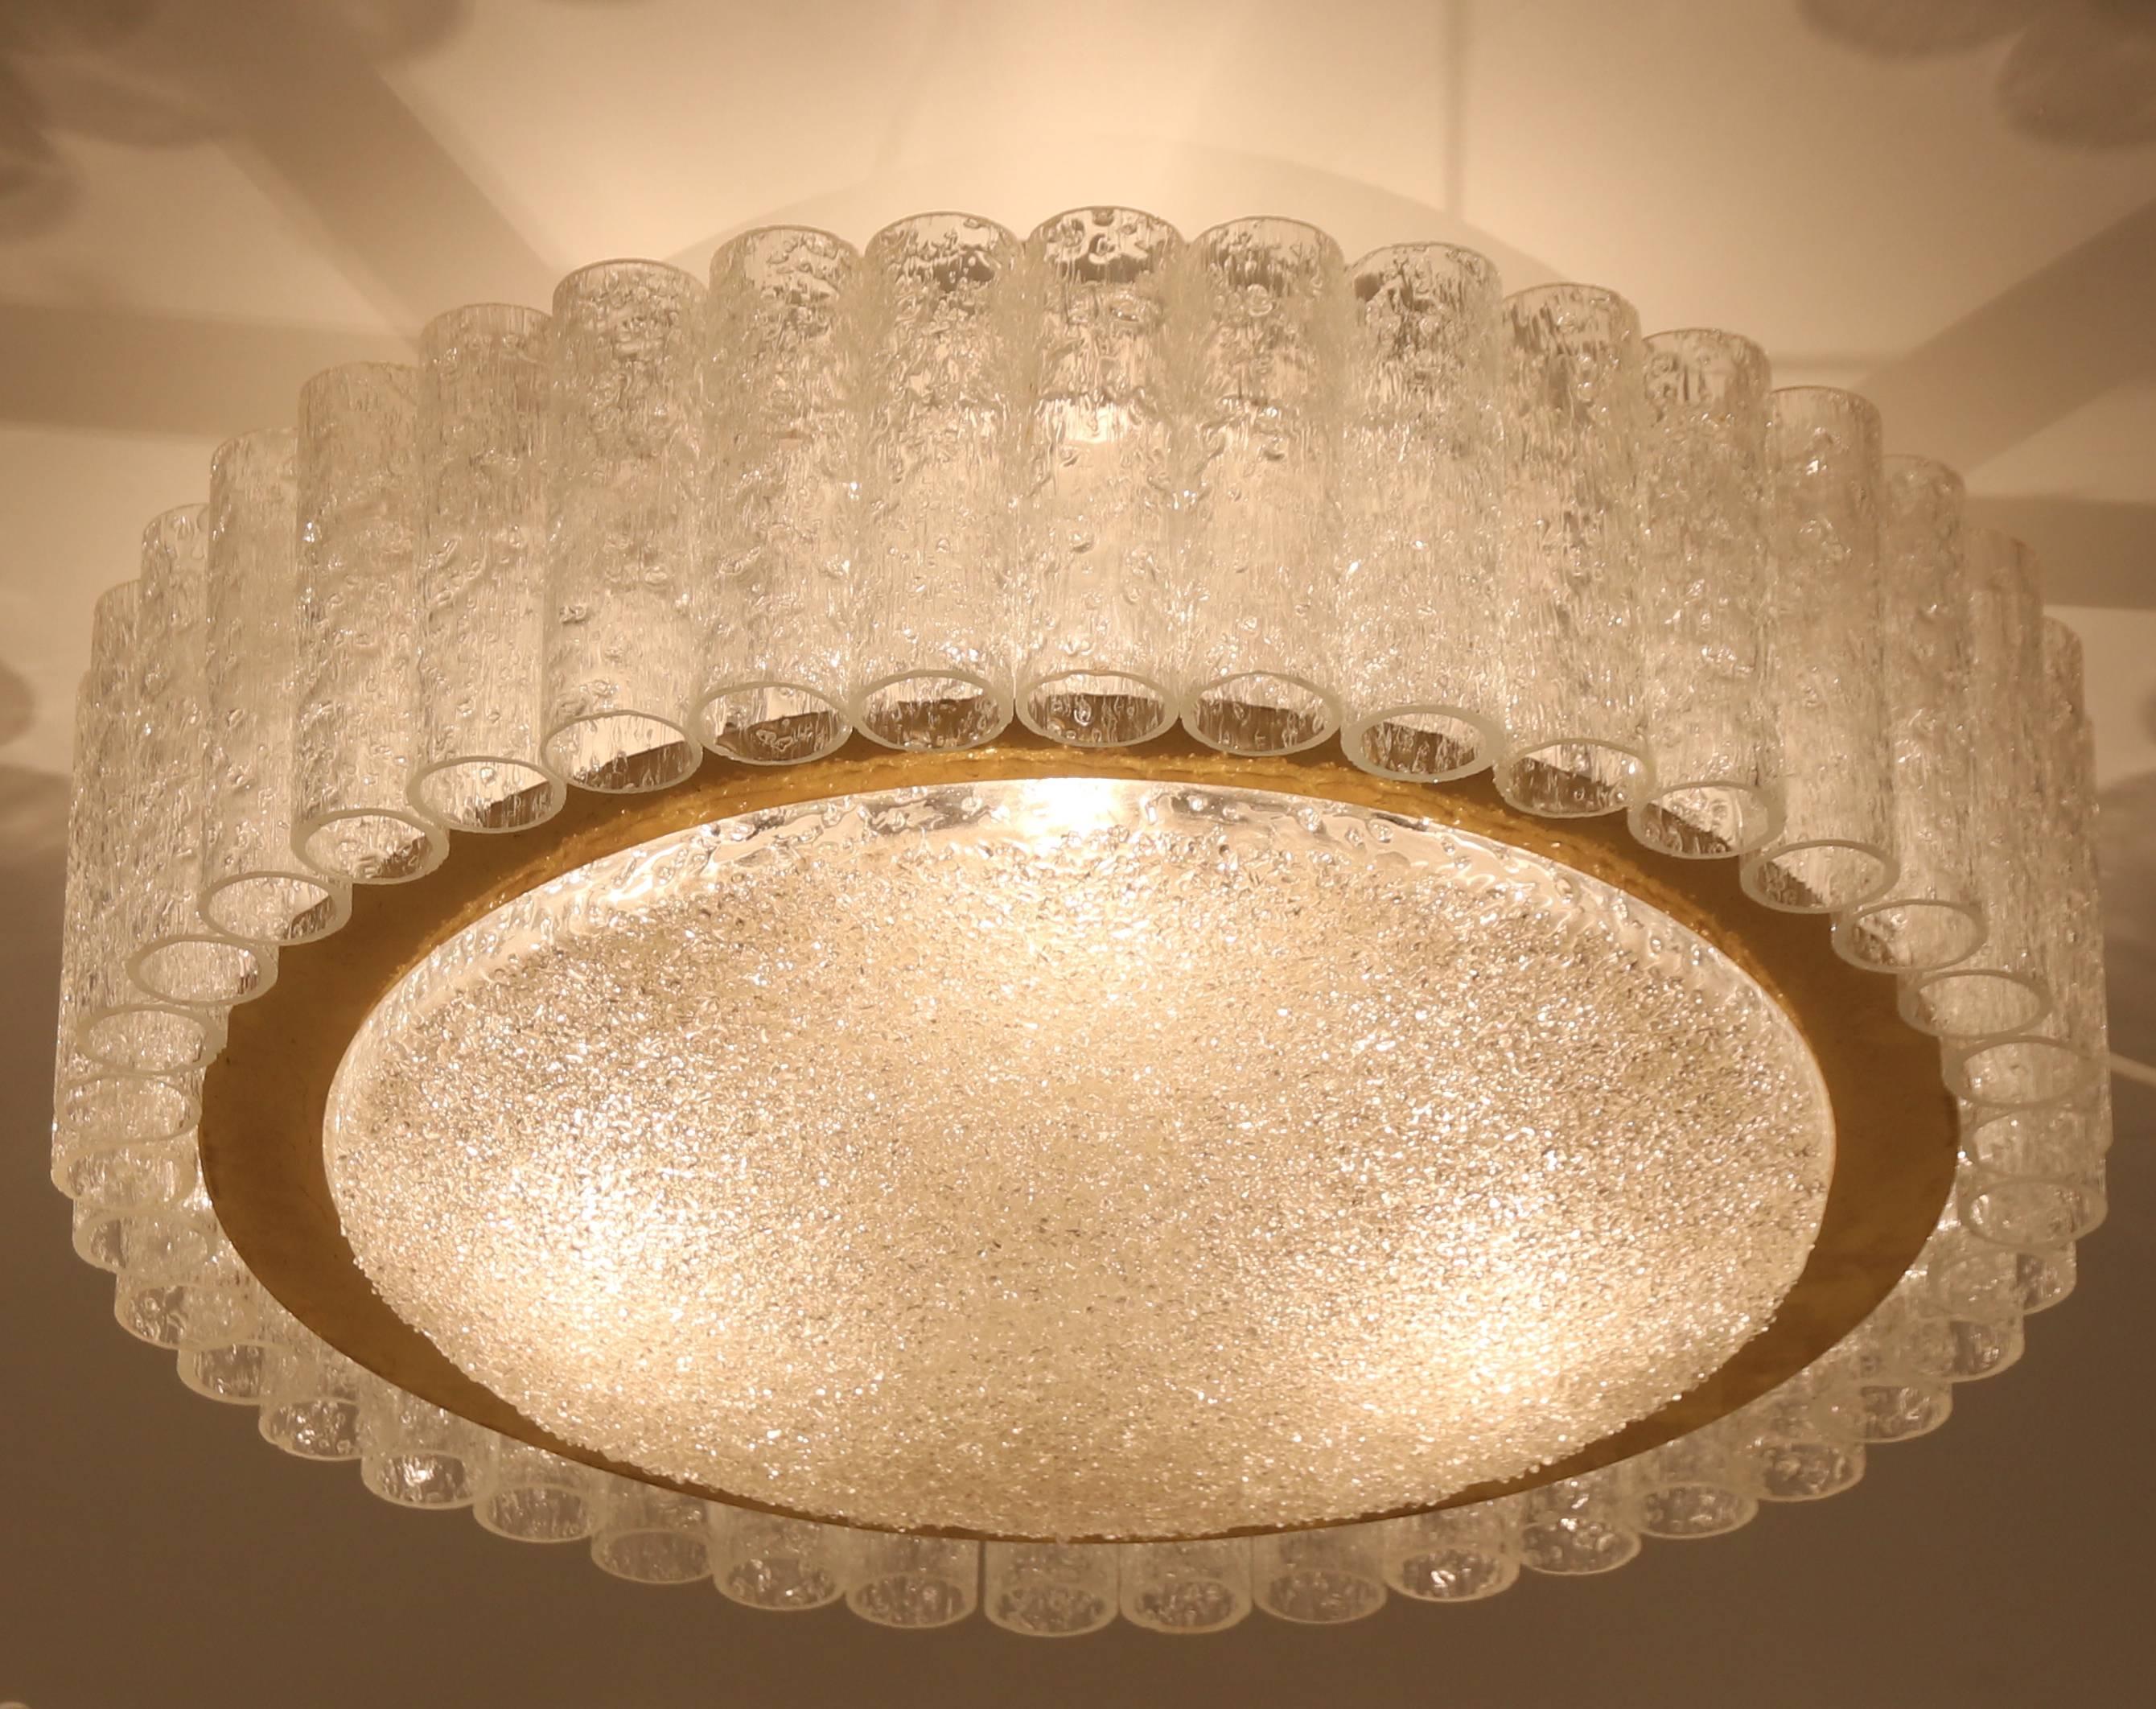 For all items from this dealer please hit the button VIEW ALL FROM SELLER below on this page

Beautiful Hollywood Regency style flush mount light by Doria Leuchten, made in Austria with Italian Murano glass. The light is large, 60 cm in diameter and